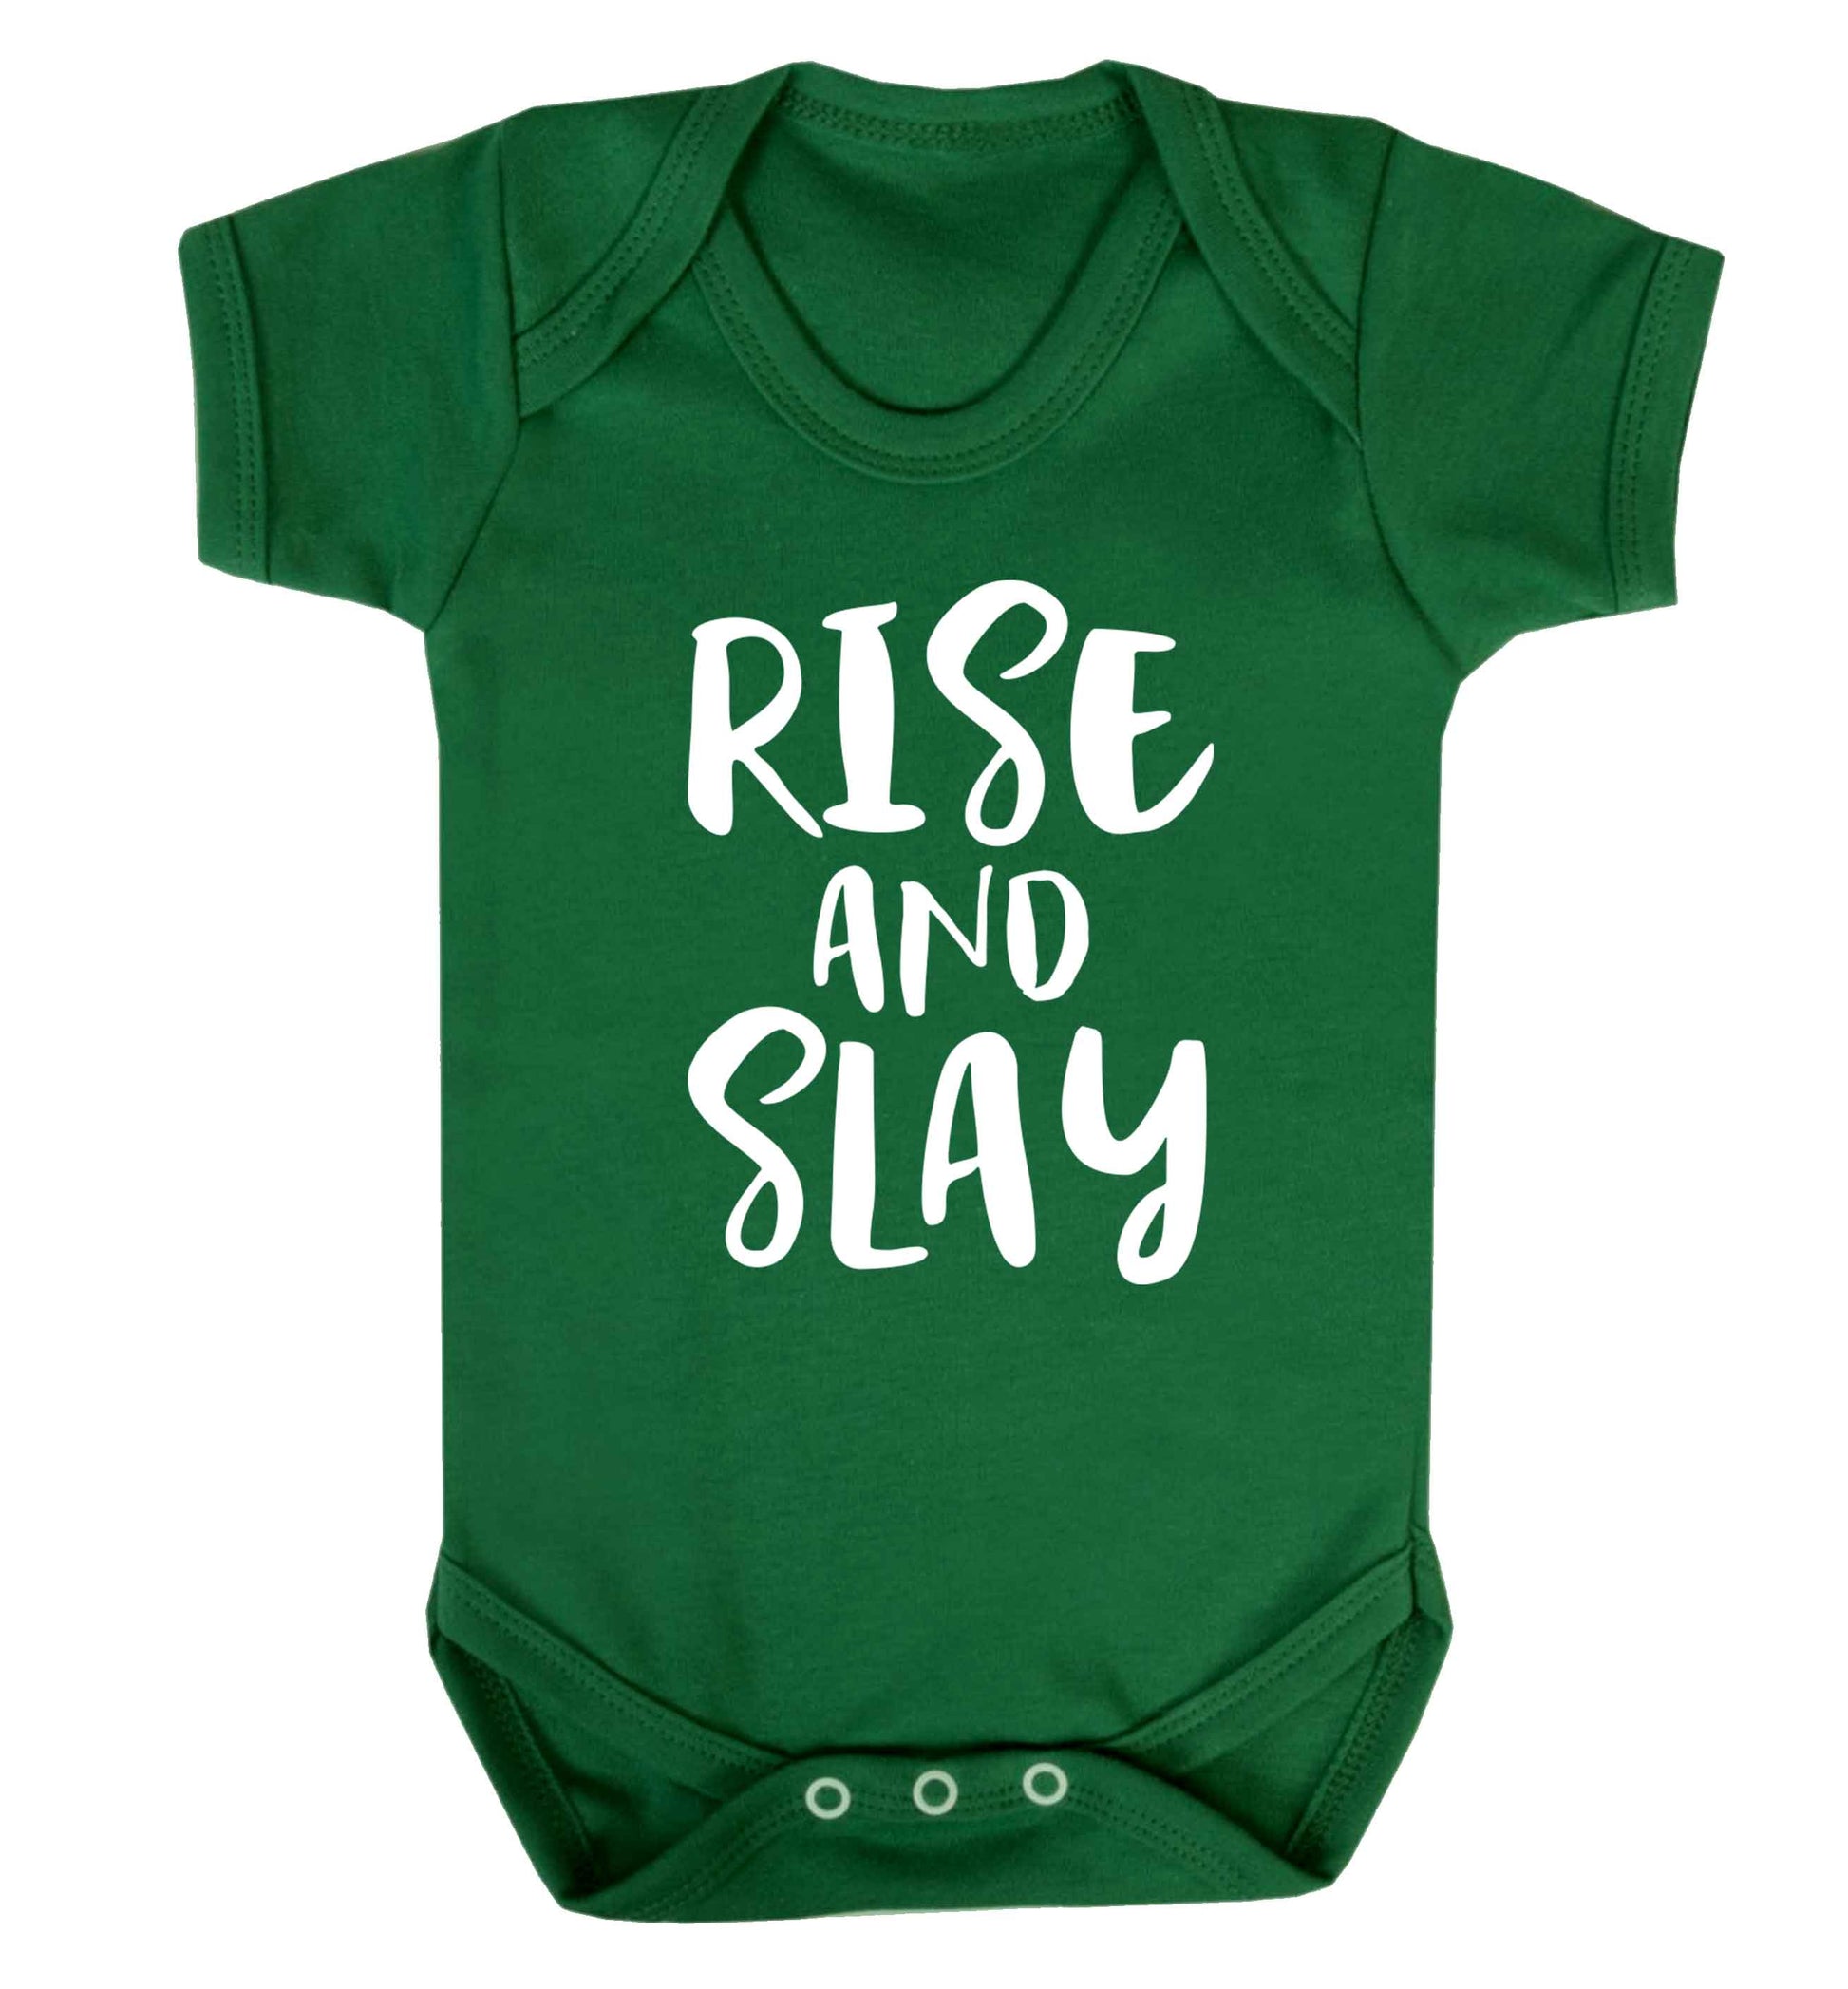 Rise and slay Baby Vest green 18-24 months